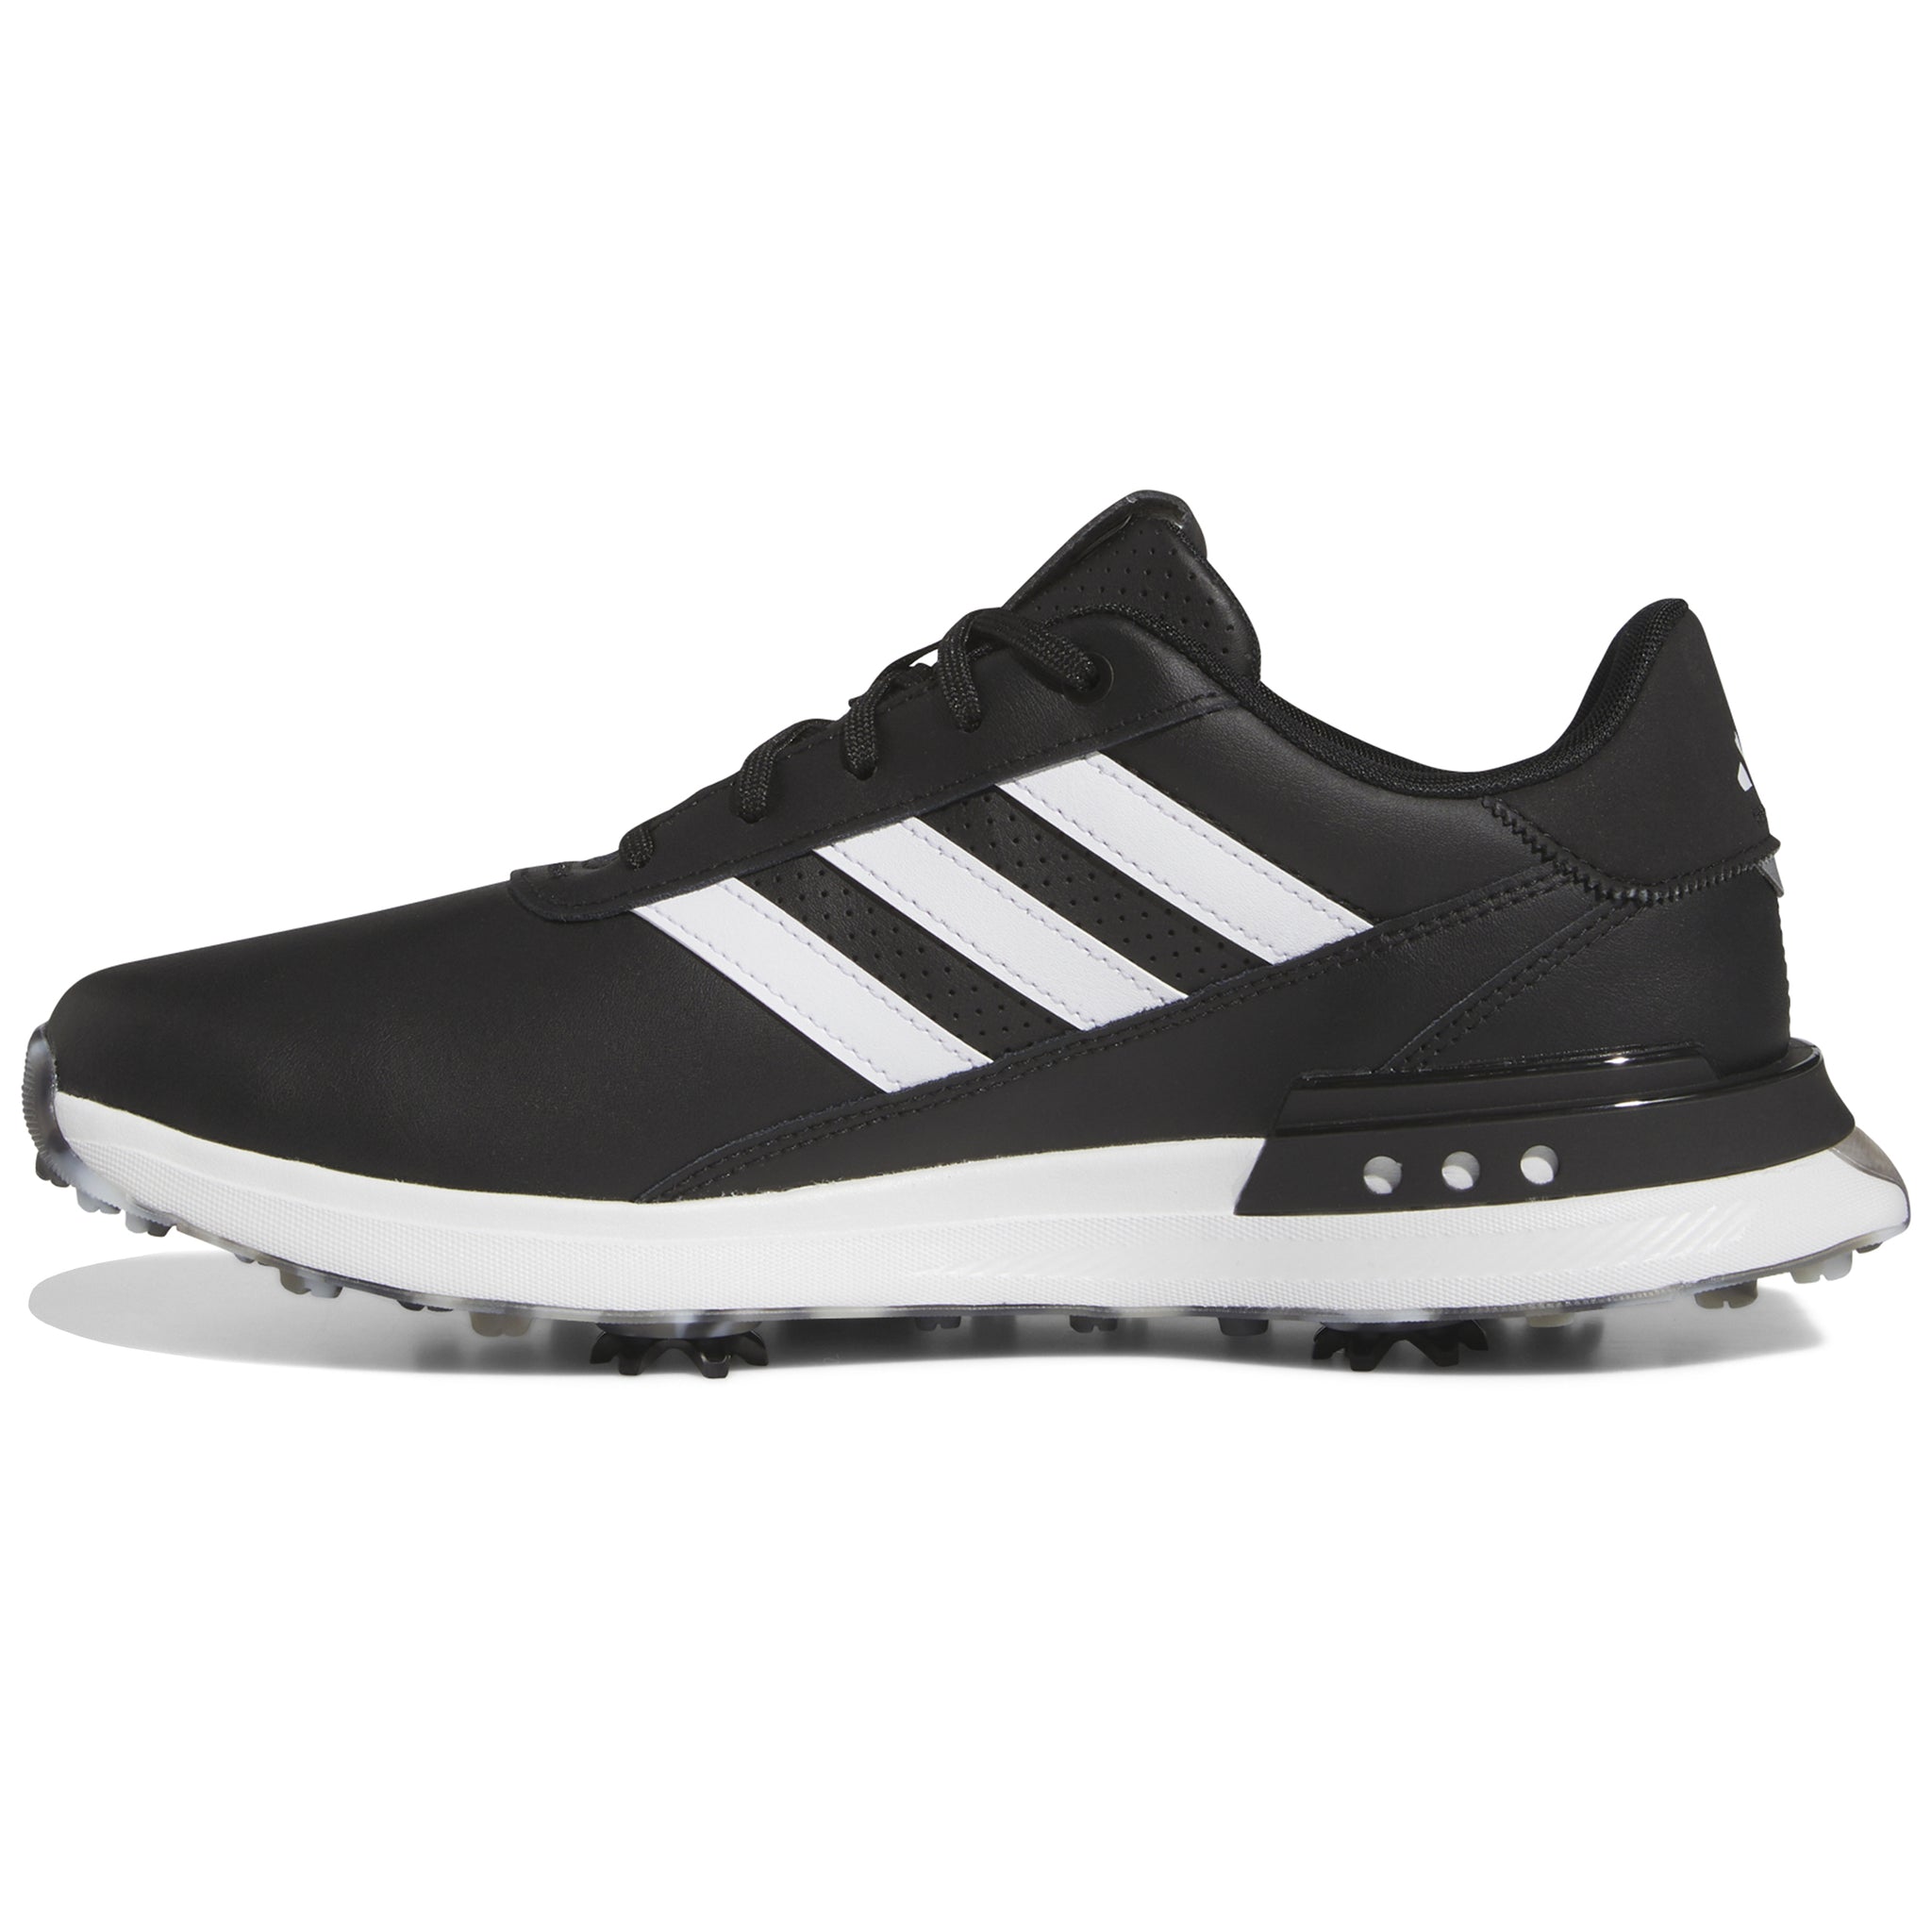 adidas-s2g-24-golf-shoes-if0294-core-black-white-bright-red